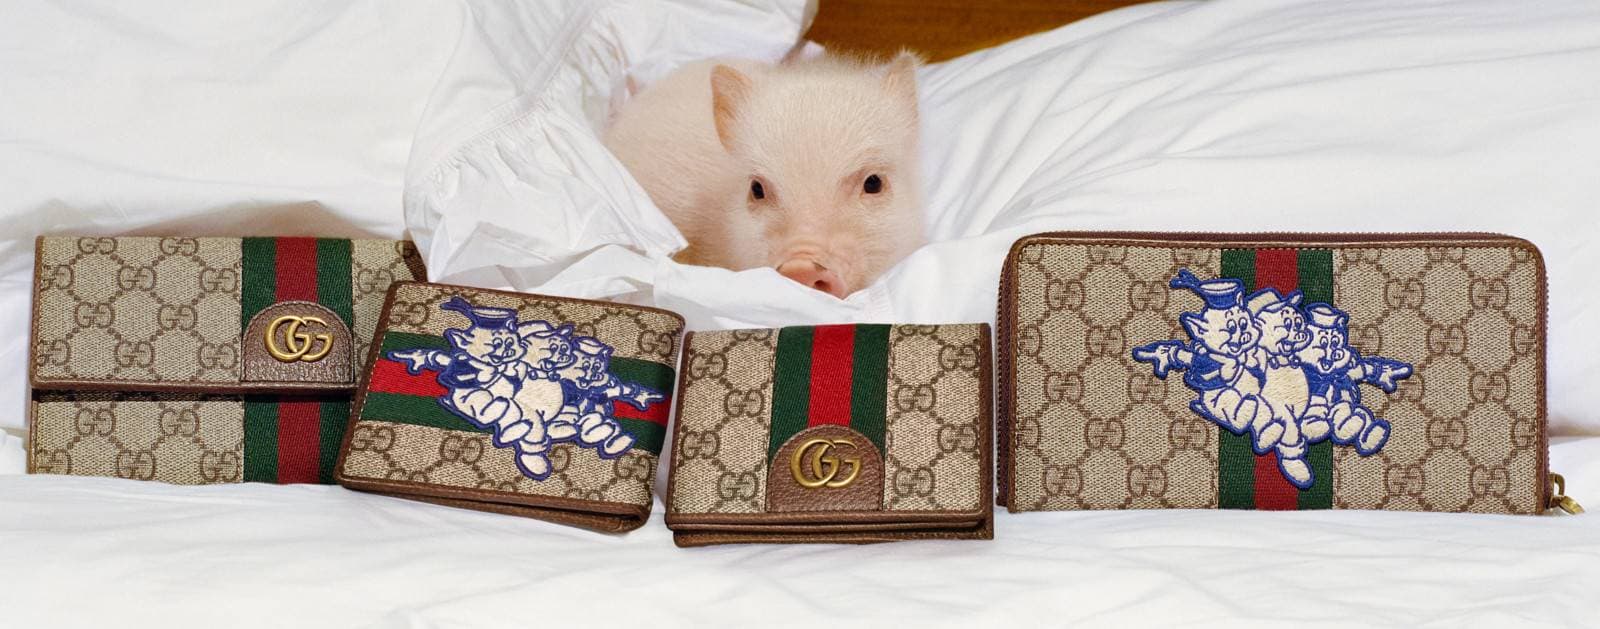 Limited edition Year of the Pig fashion collections that will leave you squealing